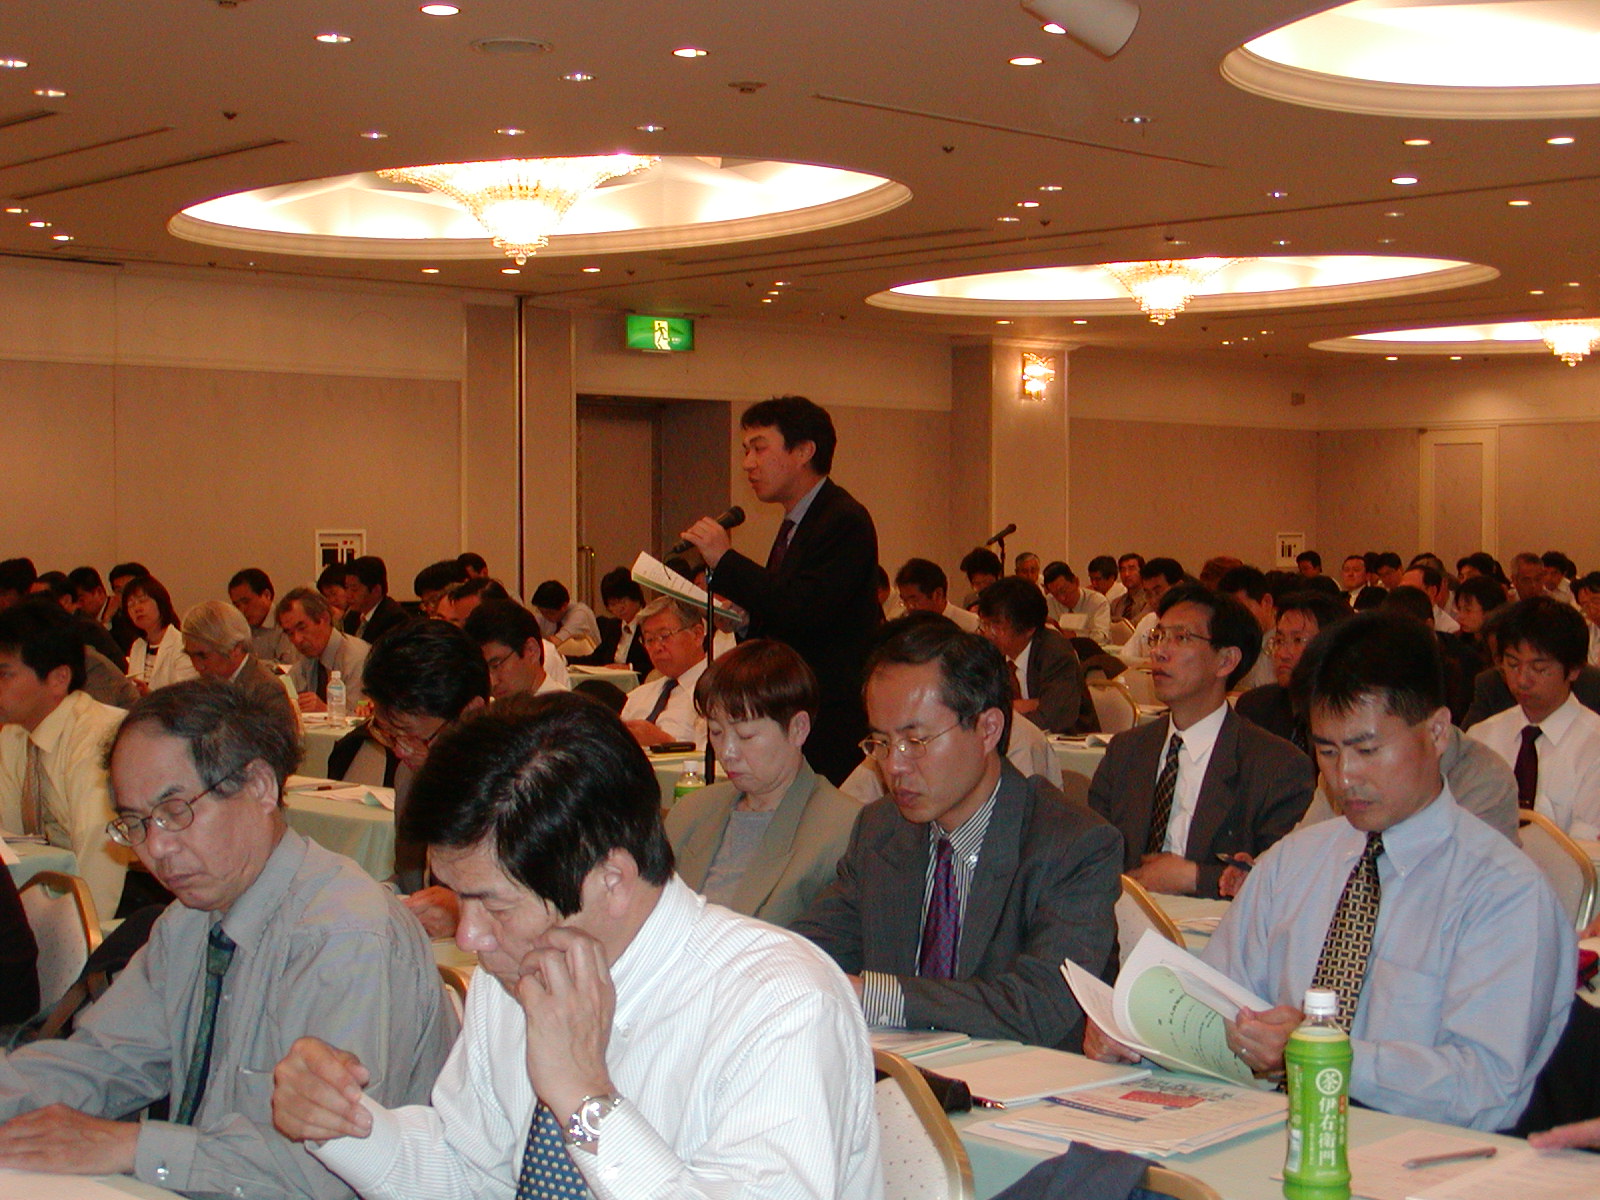 Photo: Attendees remarked on such issues as employment, local economies, long-term care insurance, the tax system, and so forth. (May 7, Ikenohata Bunka Center, Tokyo.)